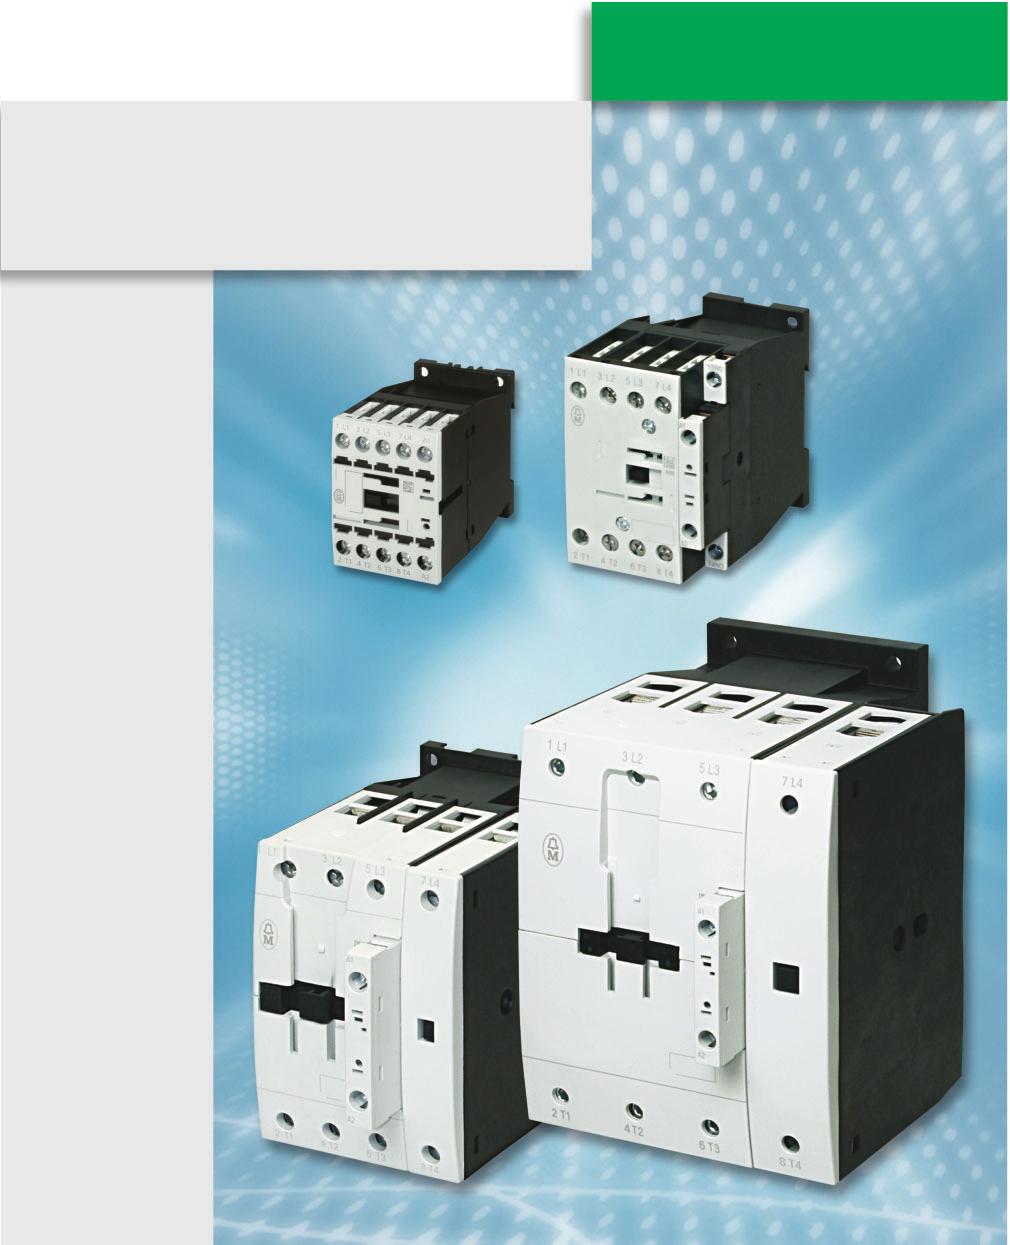 Industrial Switchgear New Products Catalogue 2007 4 Pole Switching with the The complete range of contactors, efficient motorstarters and variable speed drives for the motor